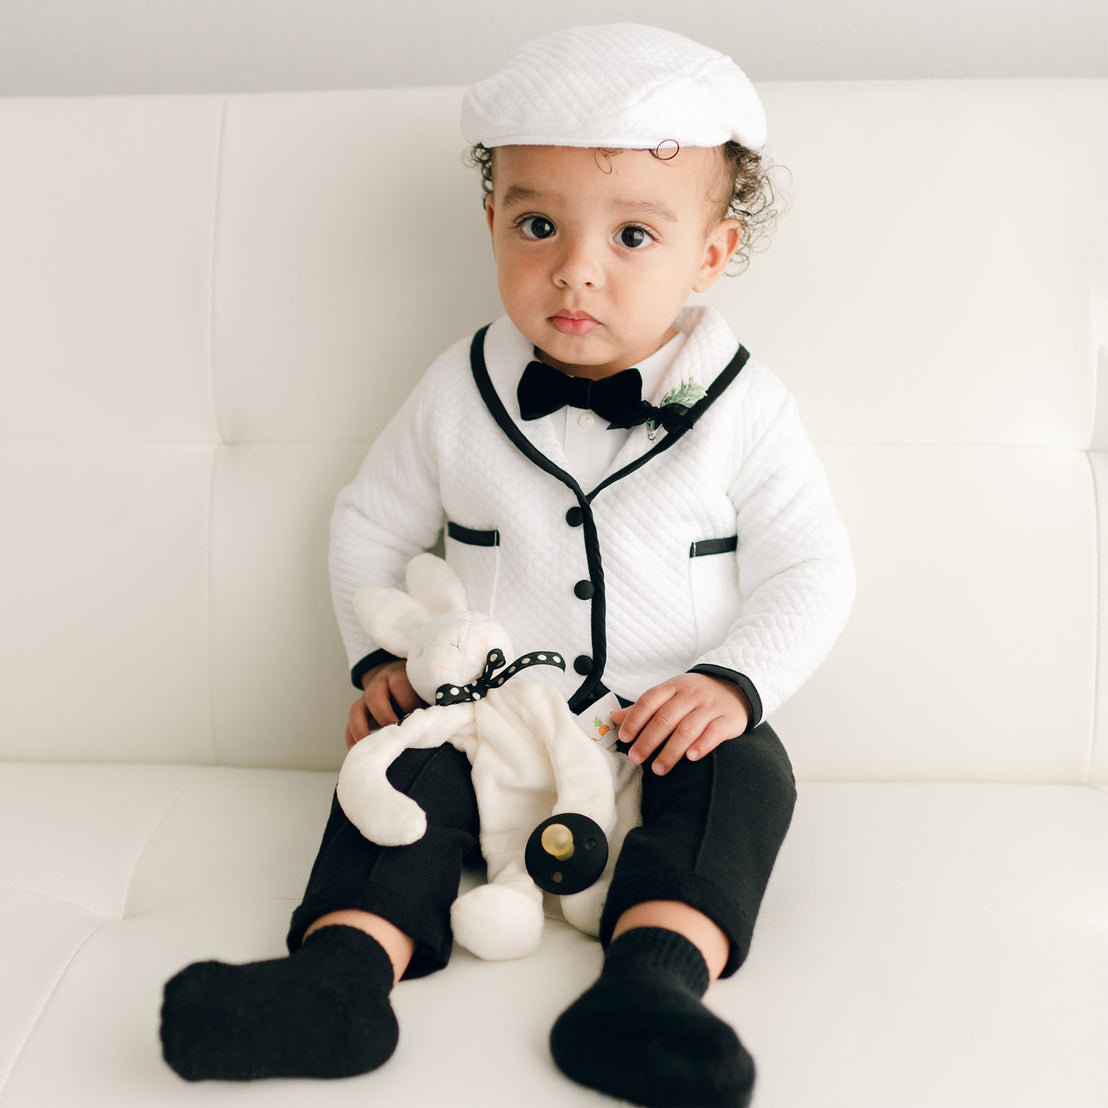 Baby boy sitting on a couch and wearing the white James 3-Piece Suit (and matching Newsboy Cap).